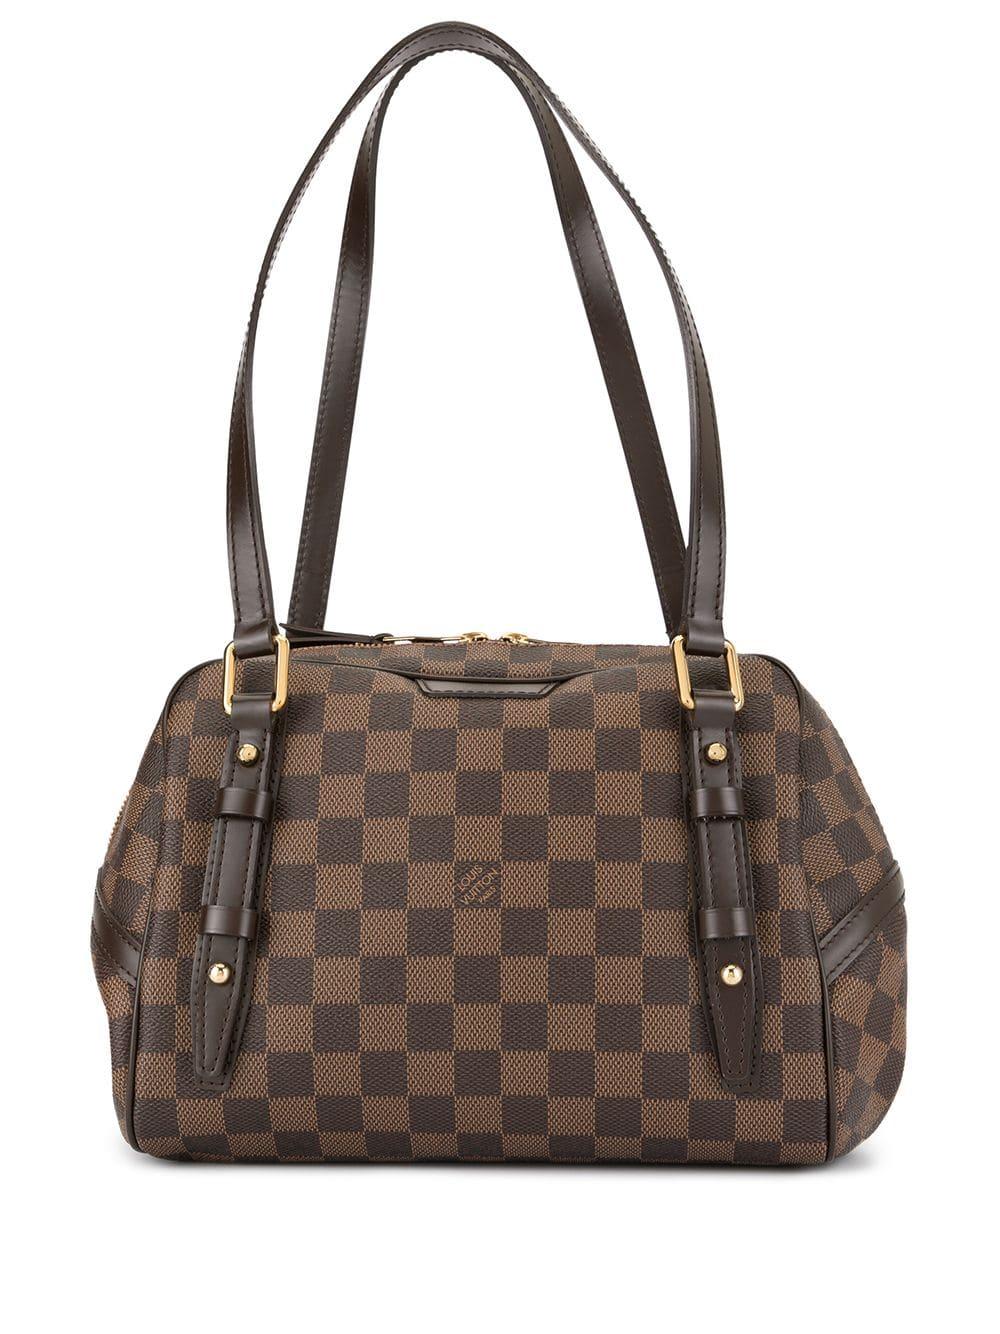 Louis Vuitton Leather Rivington Pm Tote in Brown - Lyst